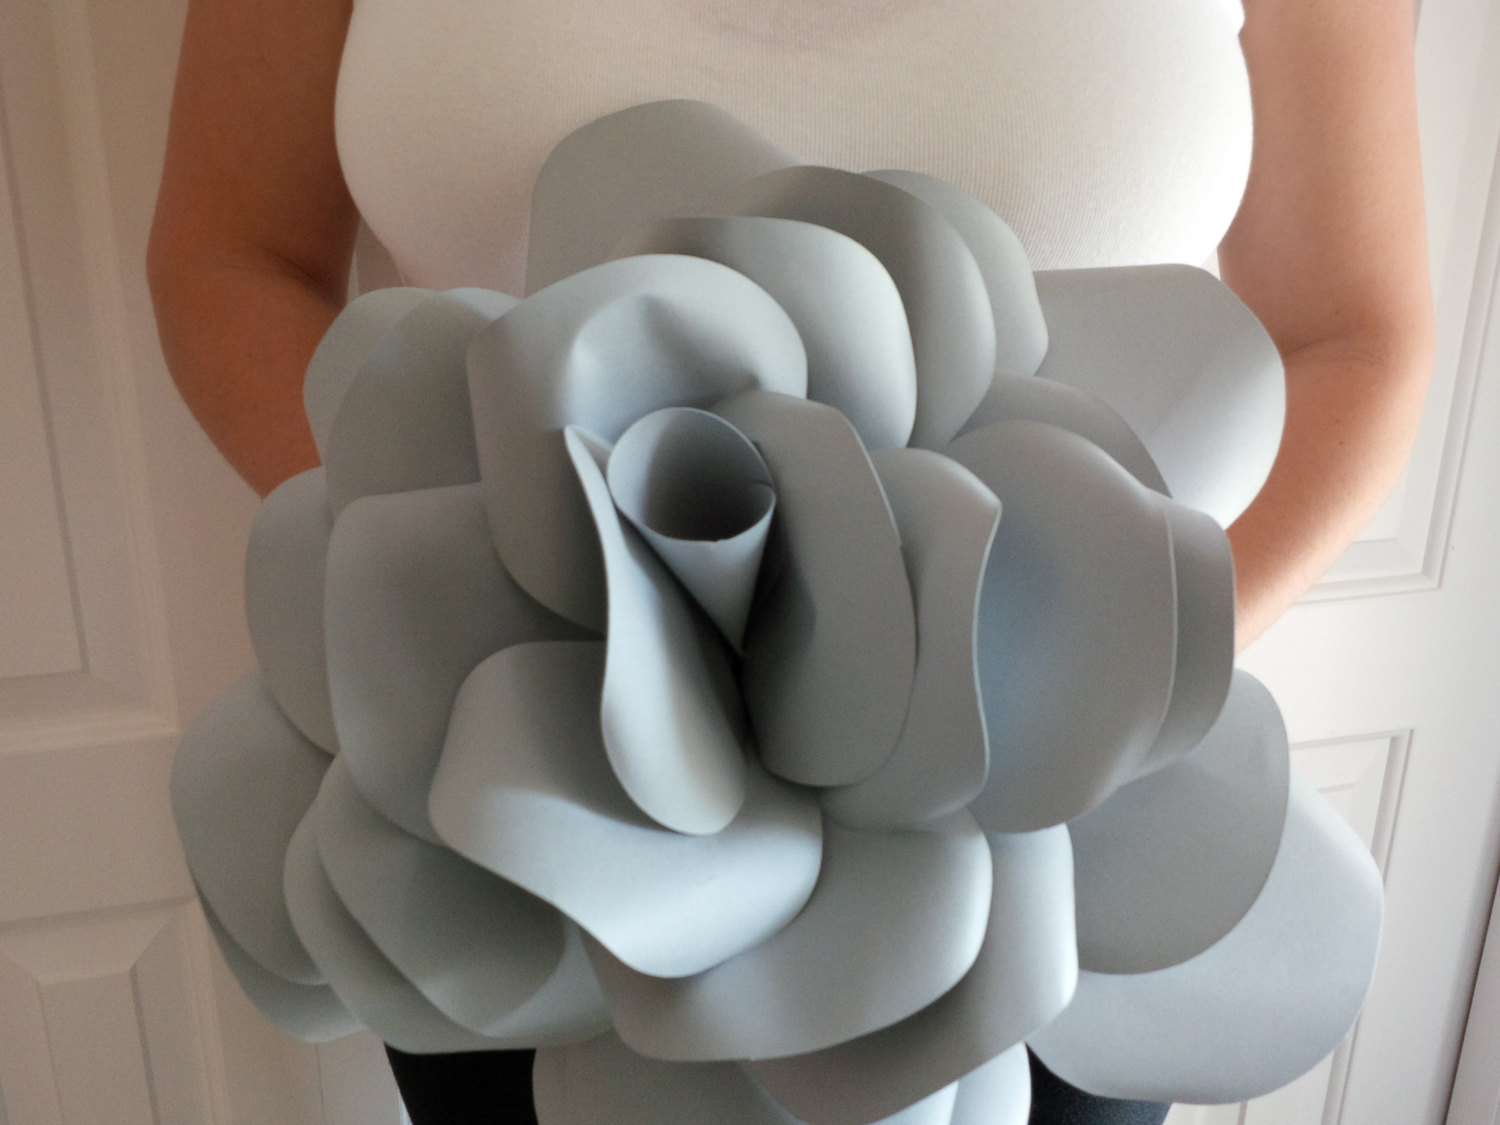 paper flower bouquets for weddings, backdrops, boutonnieres, paper flower decorations | by 2clvrdesigns on Etsy